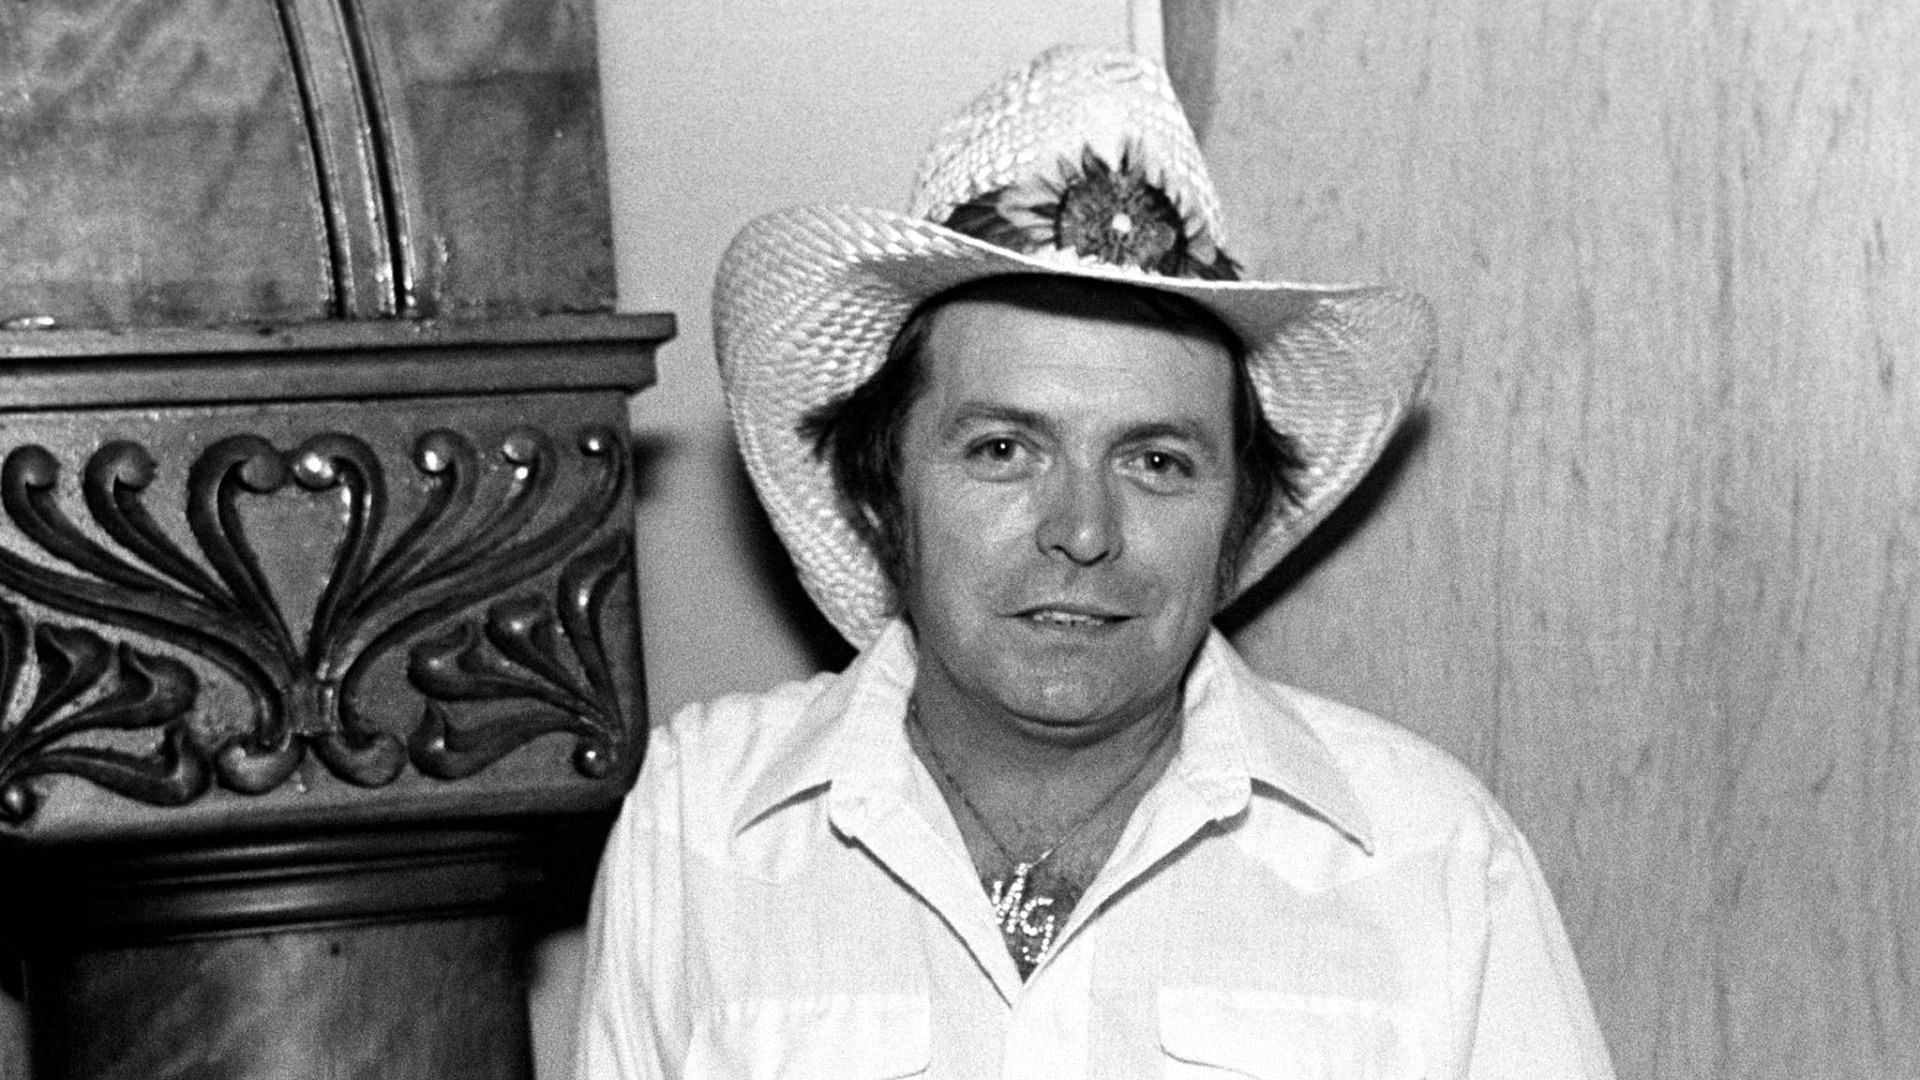 Country music icon Mickey Gilley passed away at the age of 86 (Image via Kirk West/Getty Images)